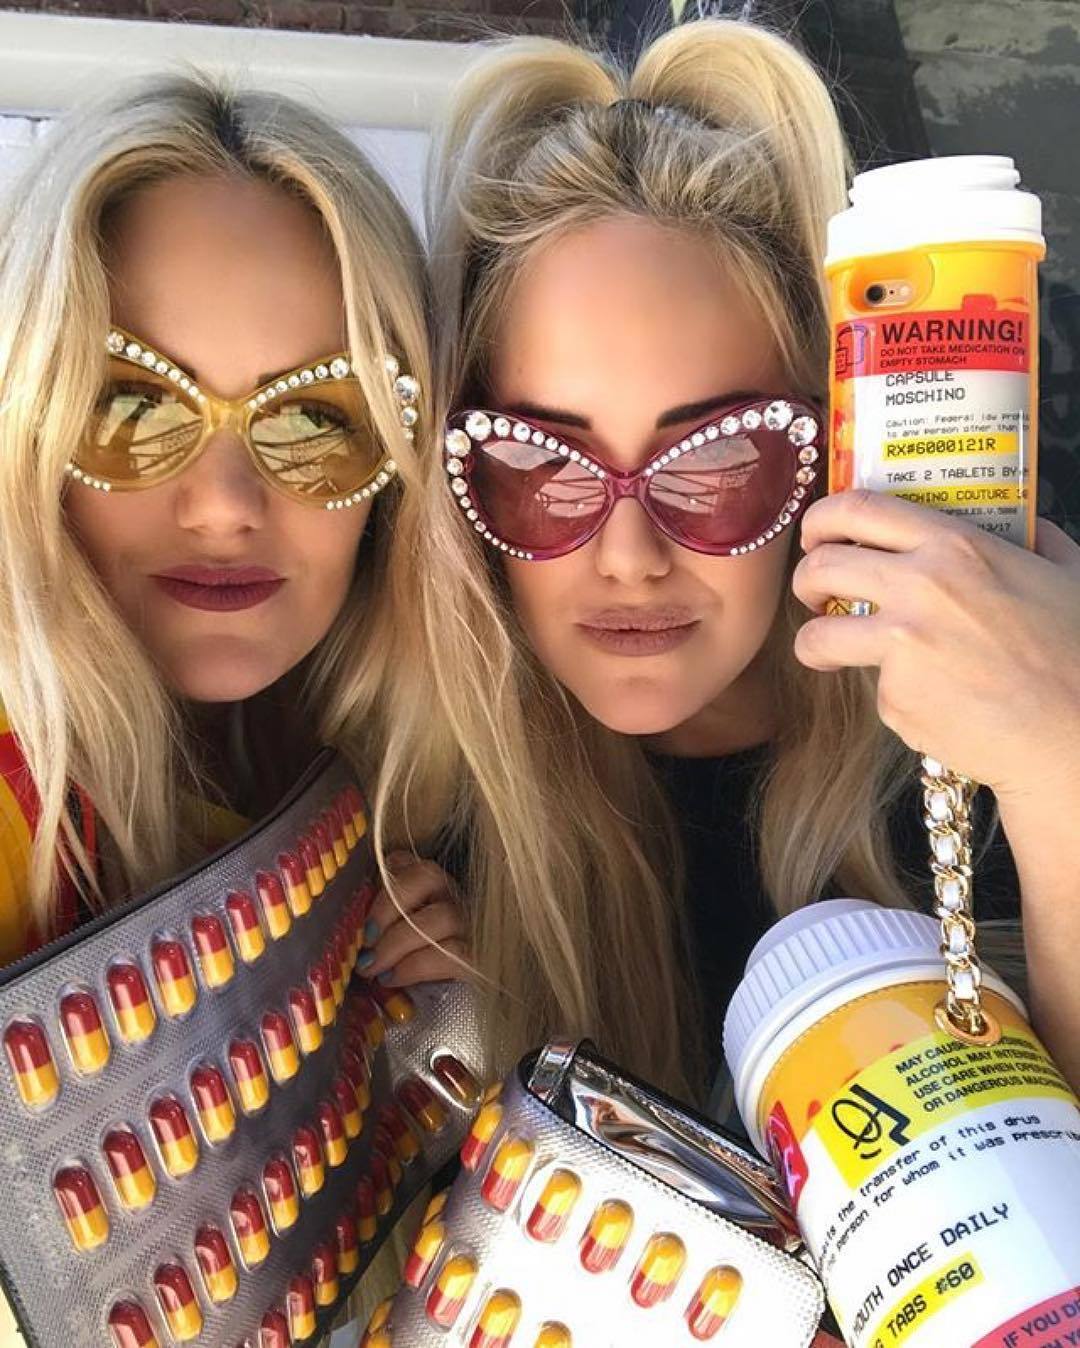 Moschino Accused Of 'Glamorising Drug Use' With New Collection